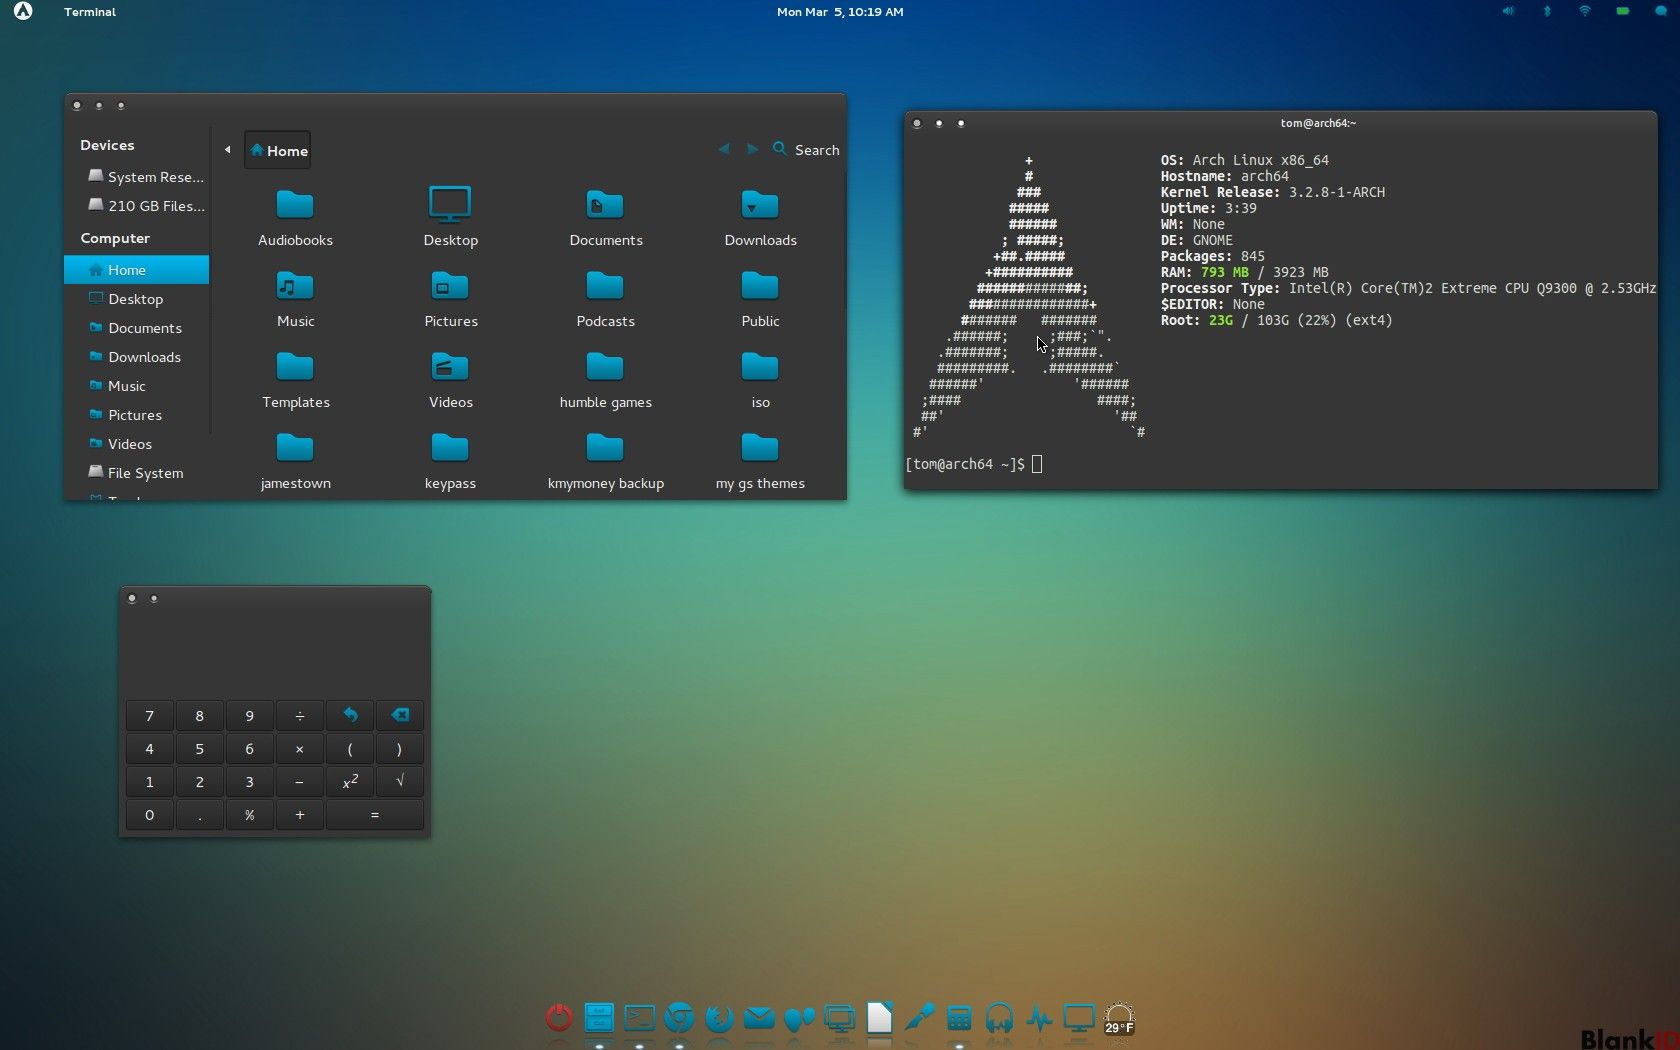 arch-linux-2015-07-01-is-now-available-for-download-485816-2.jpg